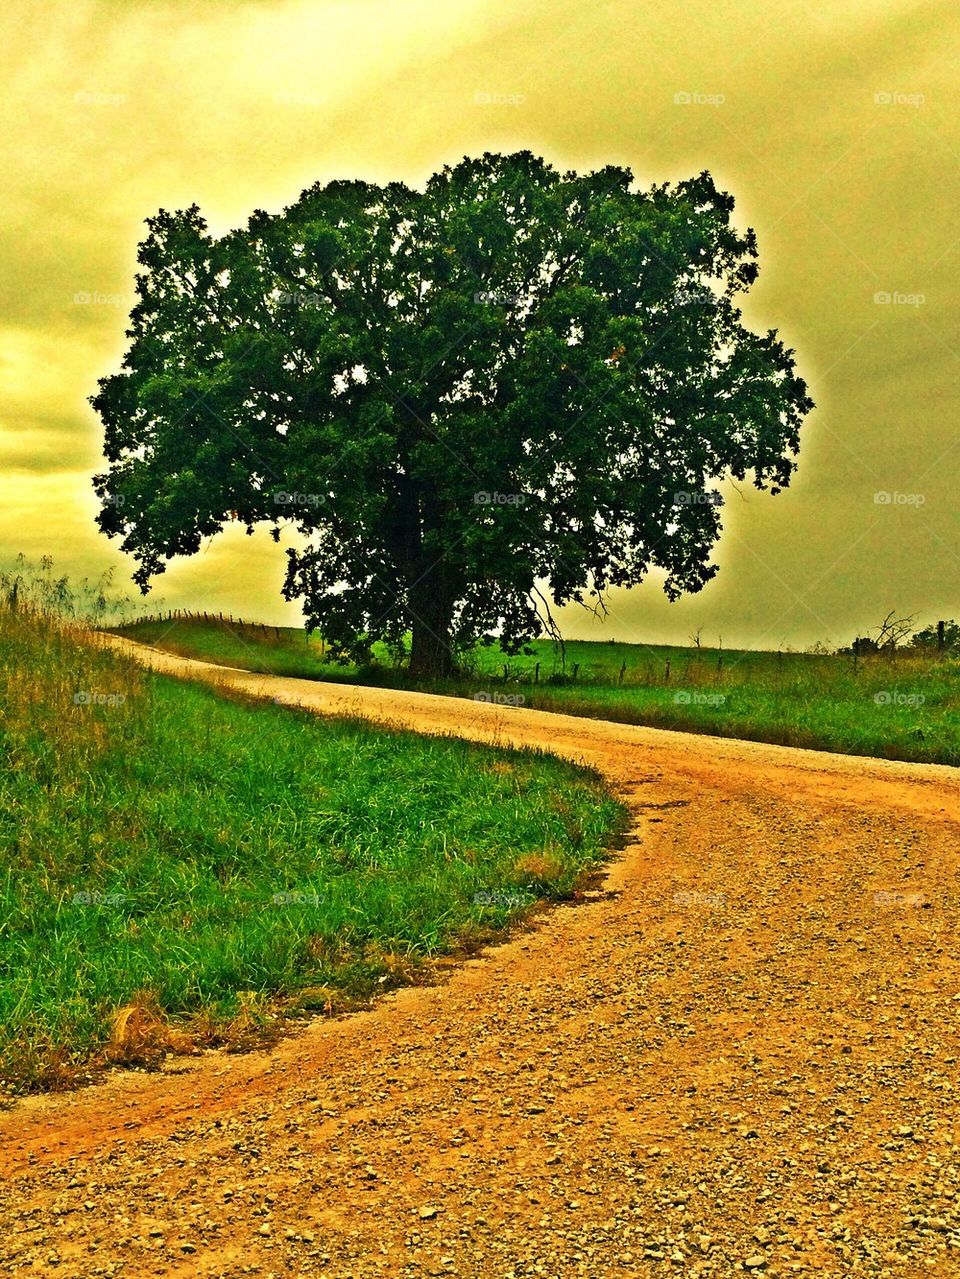 Tree on the country side 